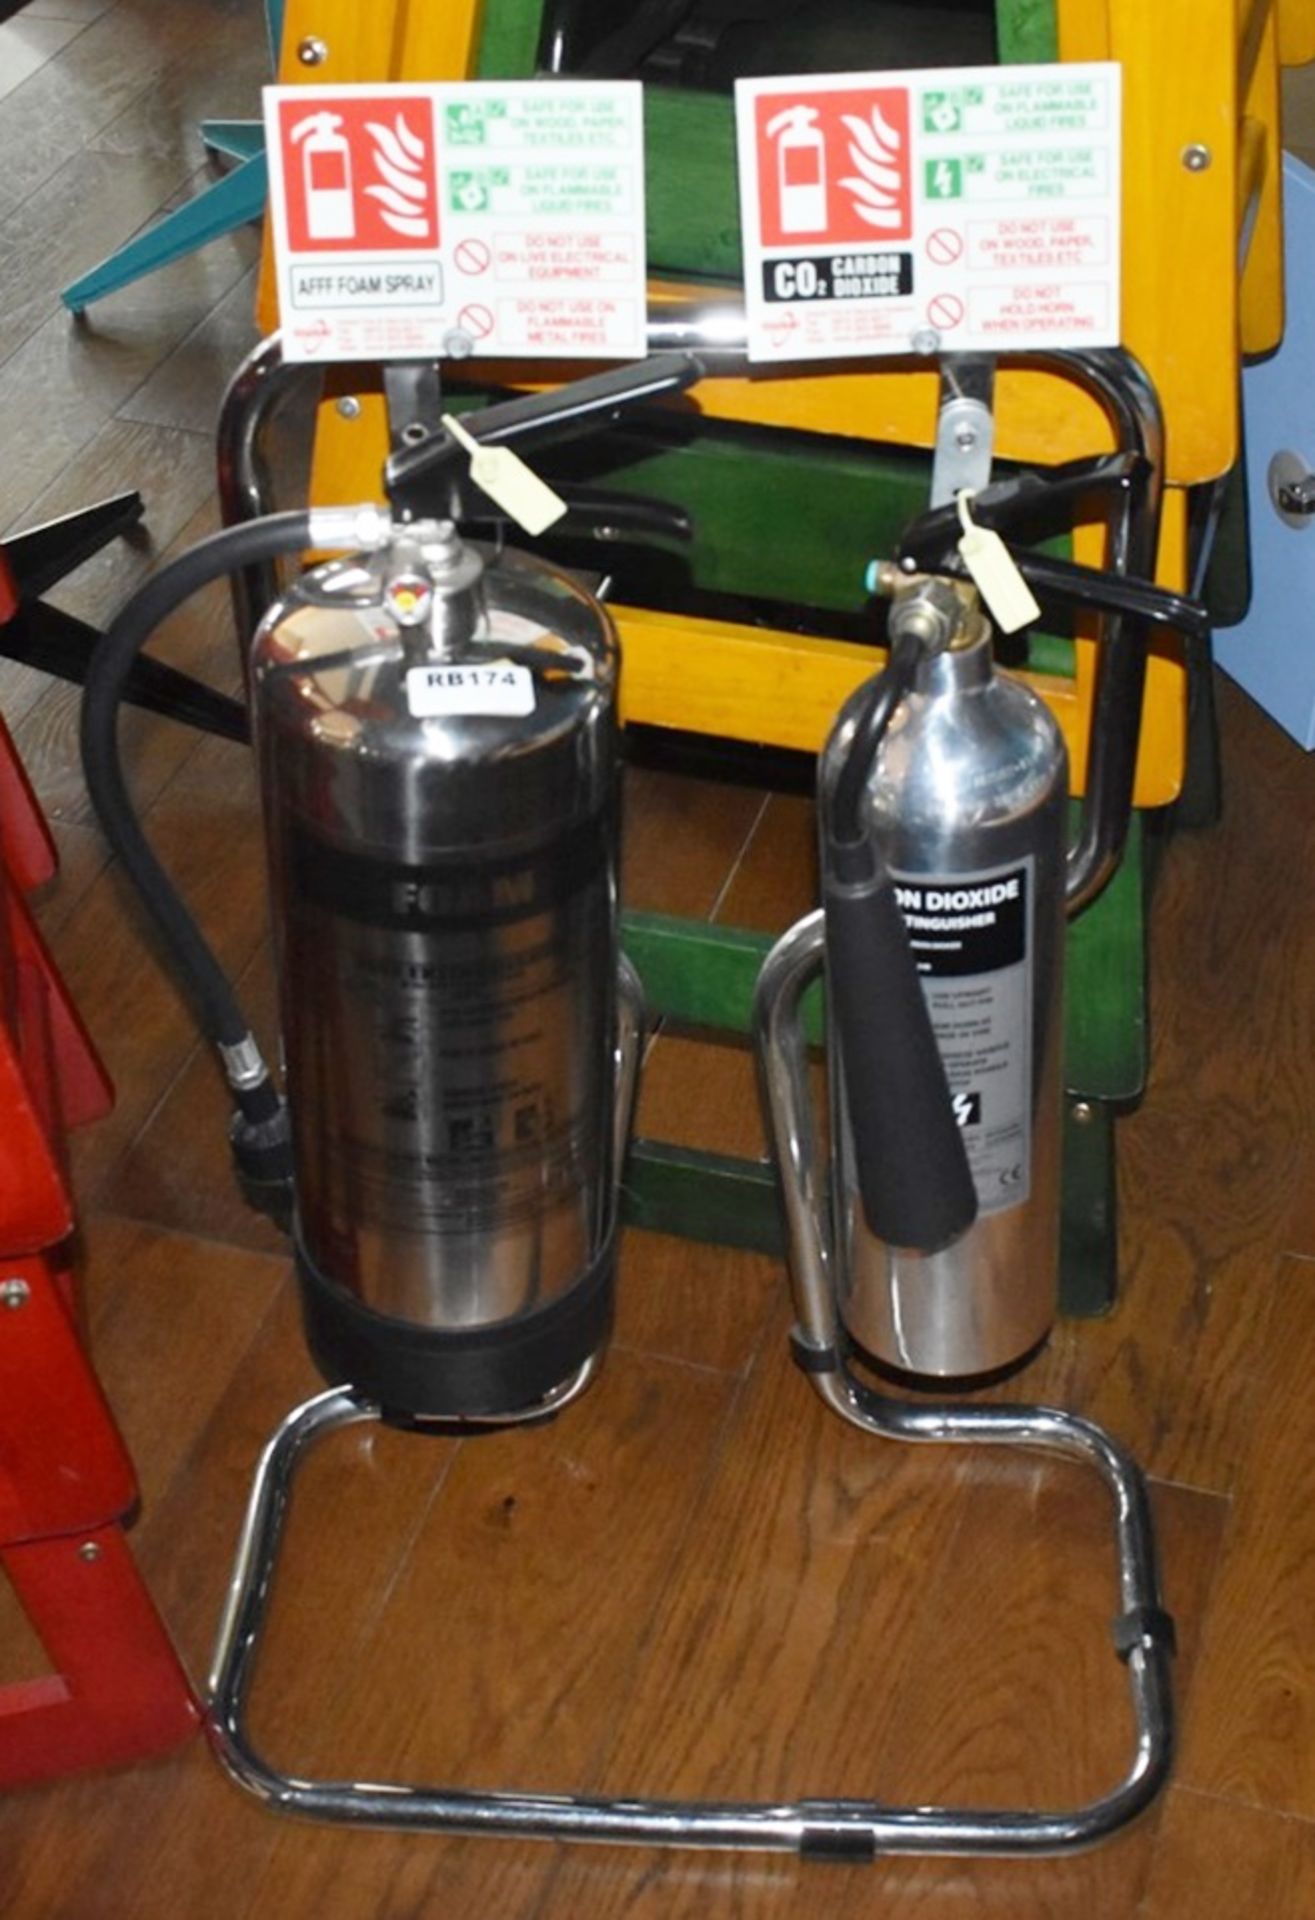 2 x Fire Extinguishers in Chrome With Stand - Foam & Carbon Dioxide - Ref: RB174 - CL558 - Location: